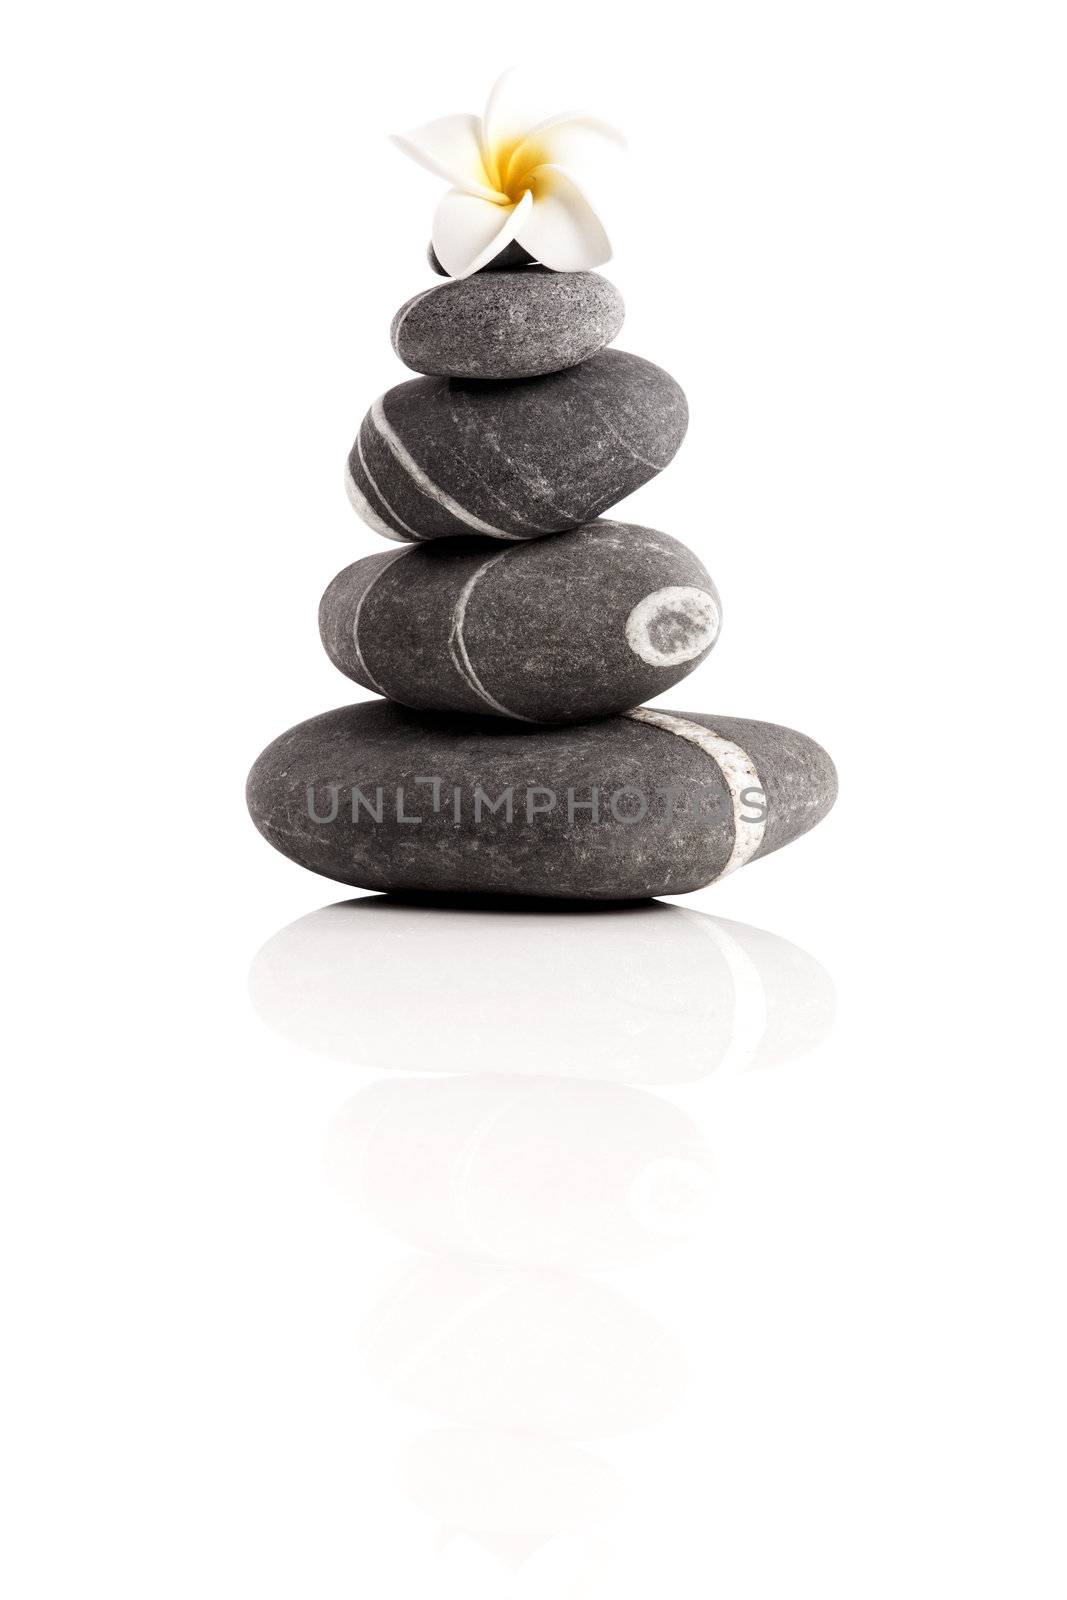 Stones pyramid with a plumeria flower, isolated on white background